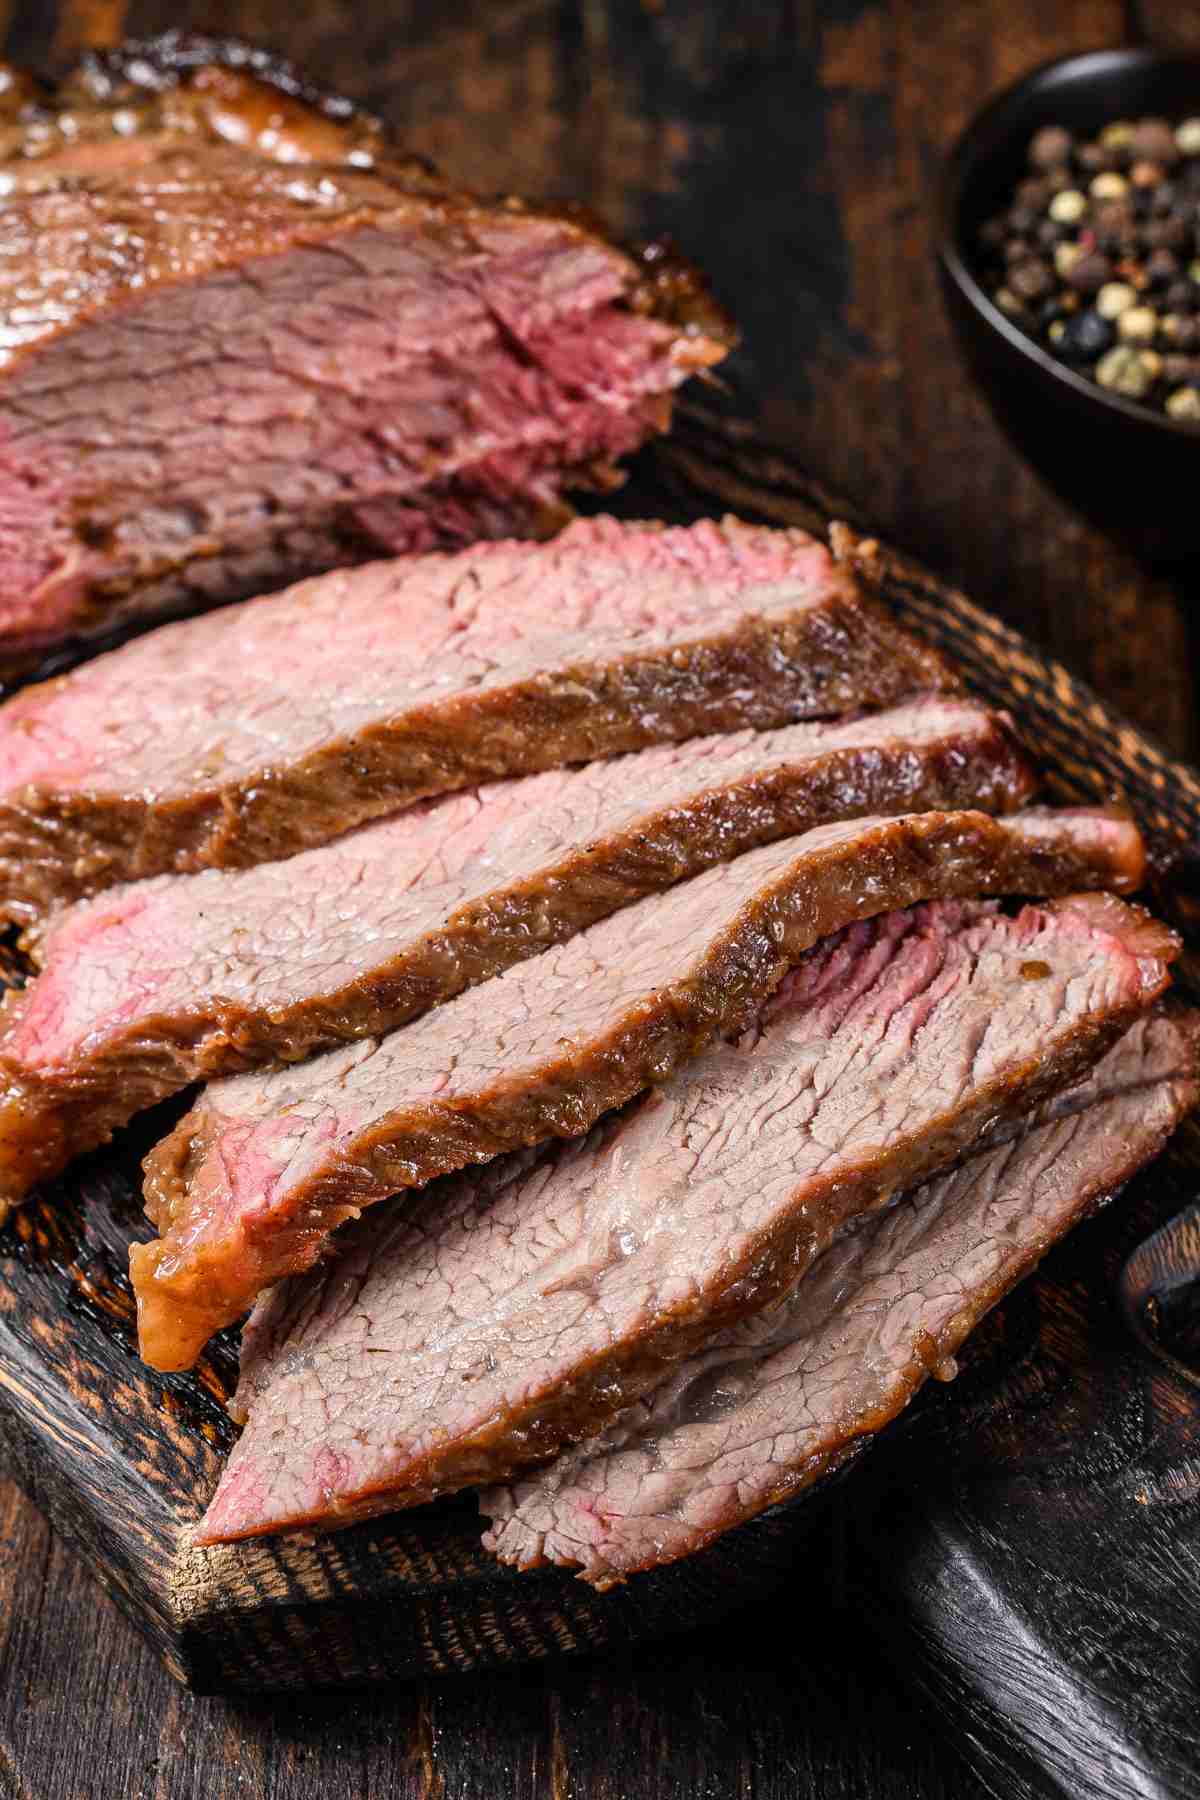 What’s the key to achieving the perfect tri-tip? It’s all about getting the right internal temperature! Keep reading to learn everything you need to know about cooking this tasty beef cut to the best temperature for your desired doneness.